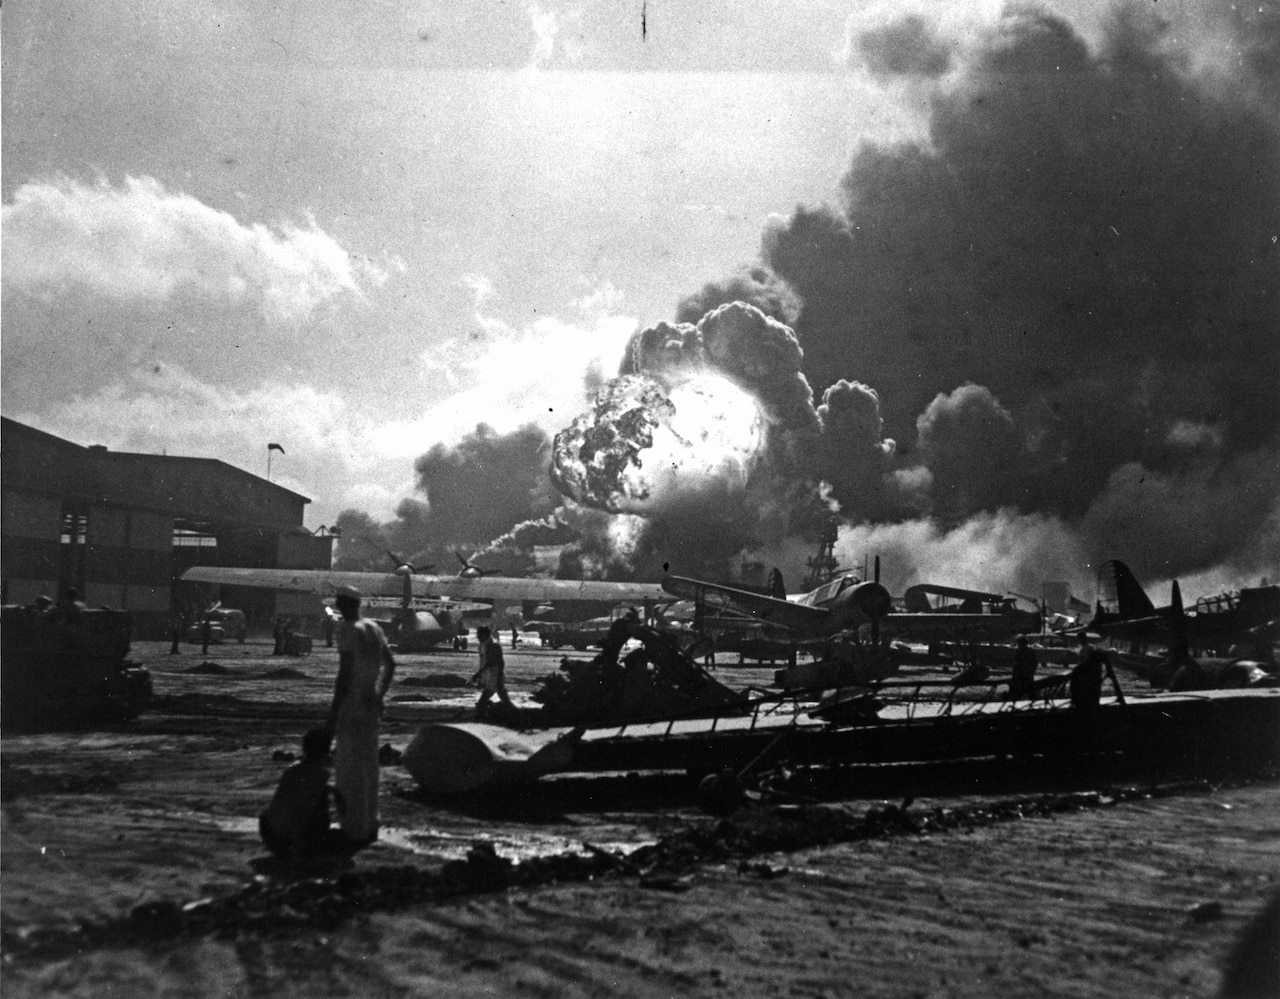 Sailors at Ford Island Naval Air Station, Hawaii, look on as the USS Shaw explodes in the distance, Dec. 7, 1941. This view is of the PBY5-A Catalina ramp with assorted aircraft scattered among the debris. Barely seen in the background is the beached USS Nevada. National Park Service photo